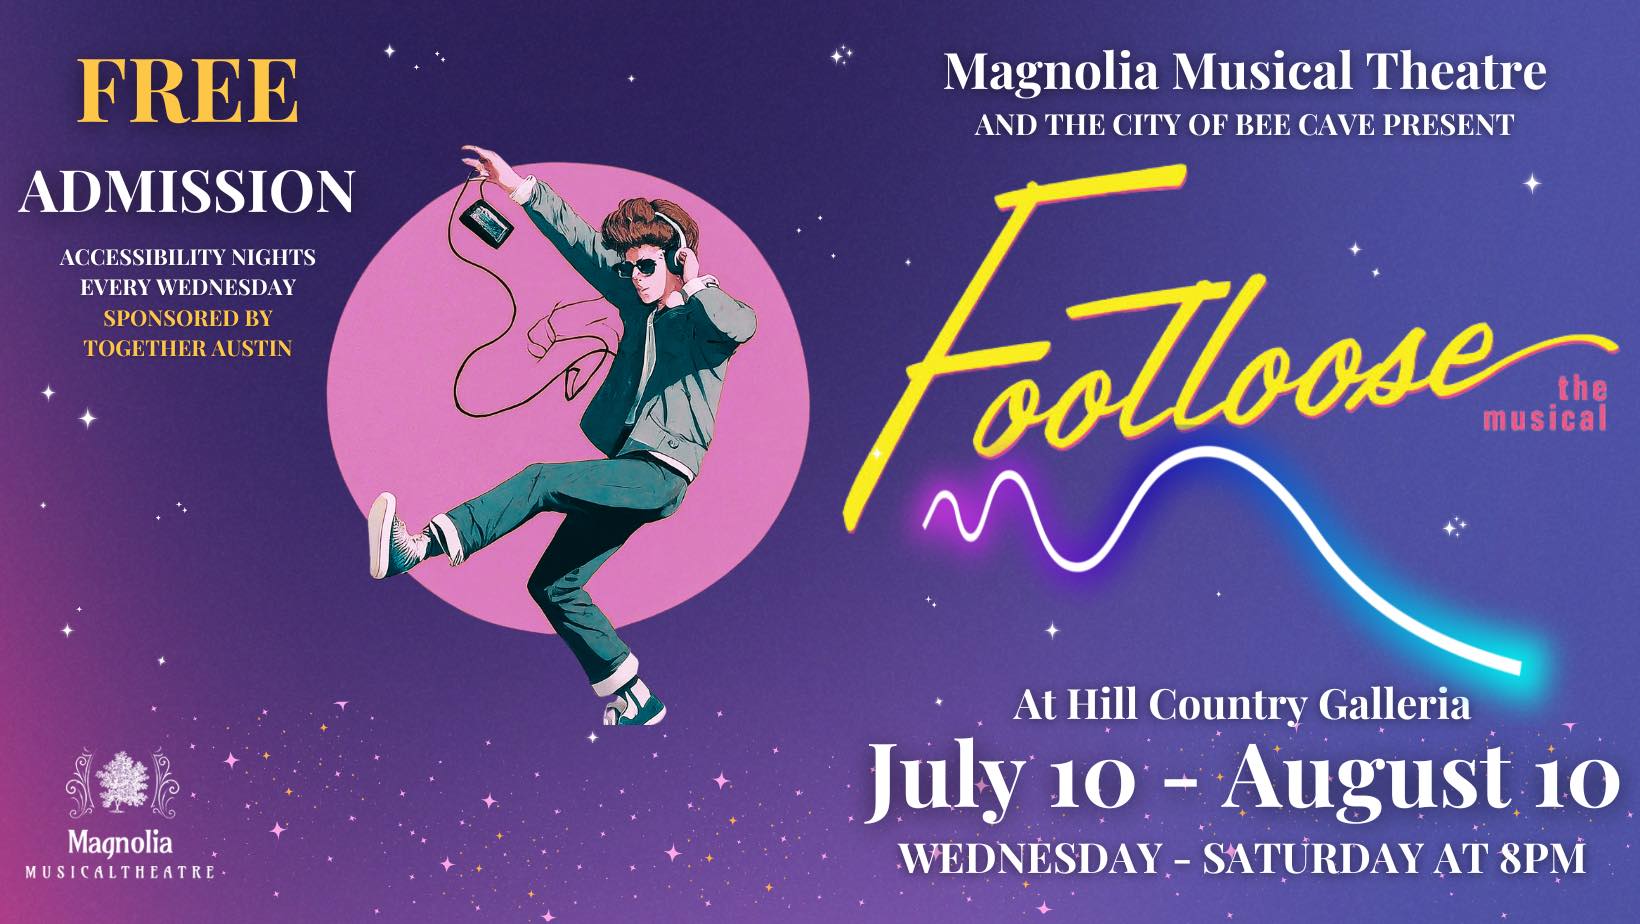 Footloose by Magnolia Musical Theatre